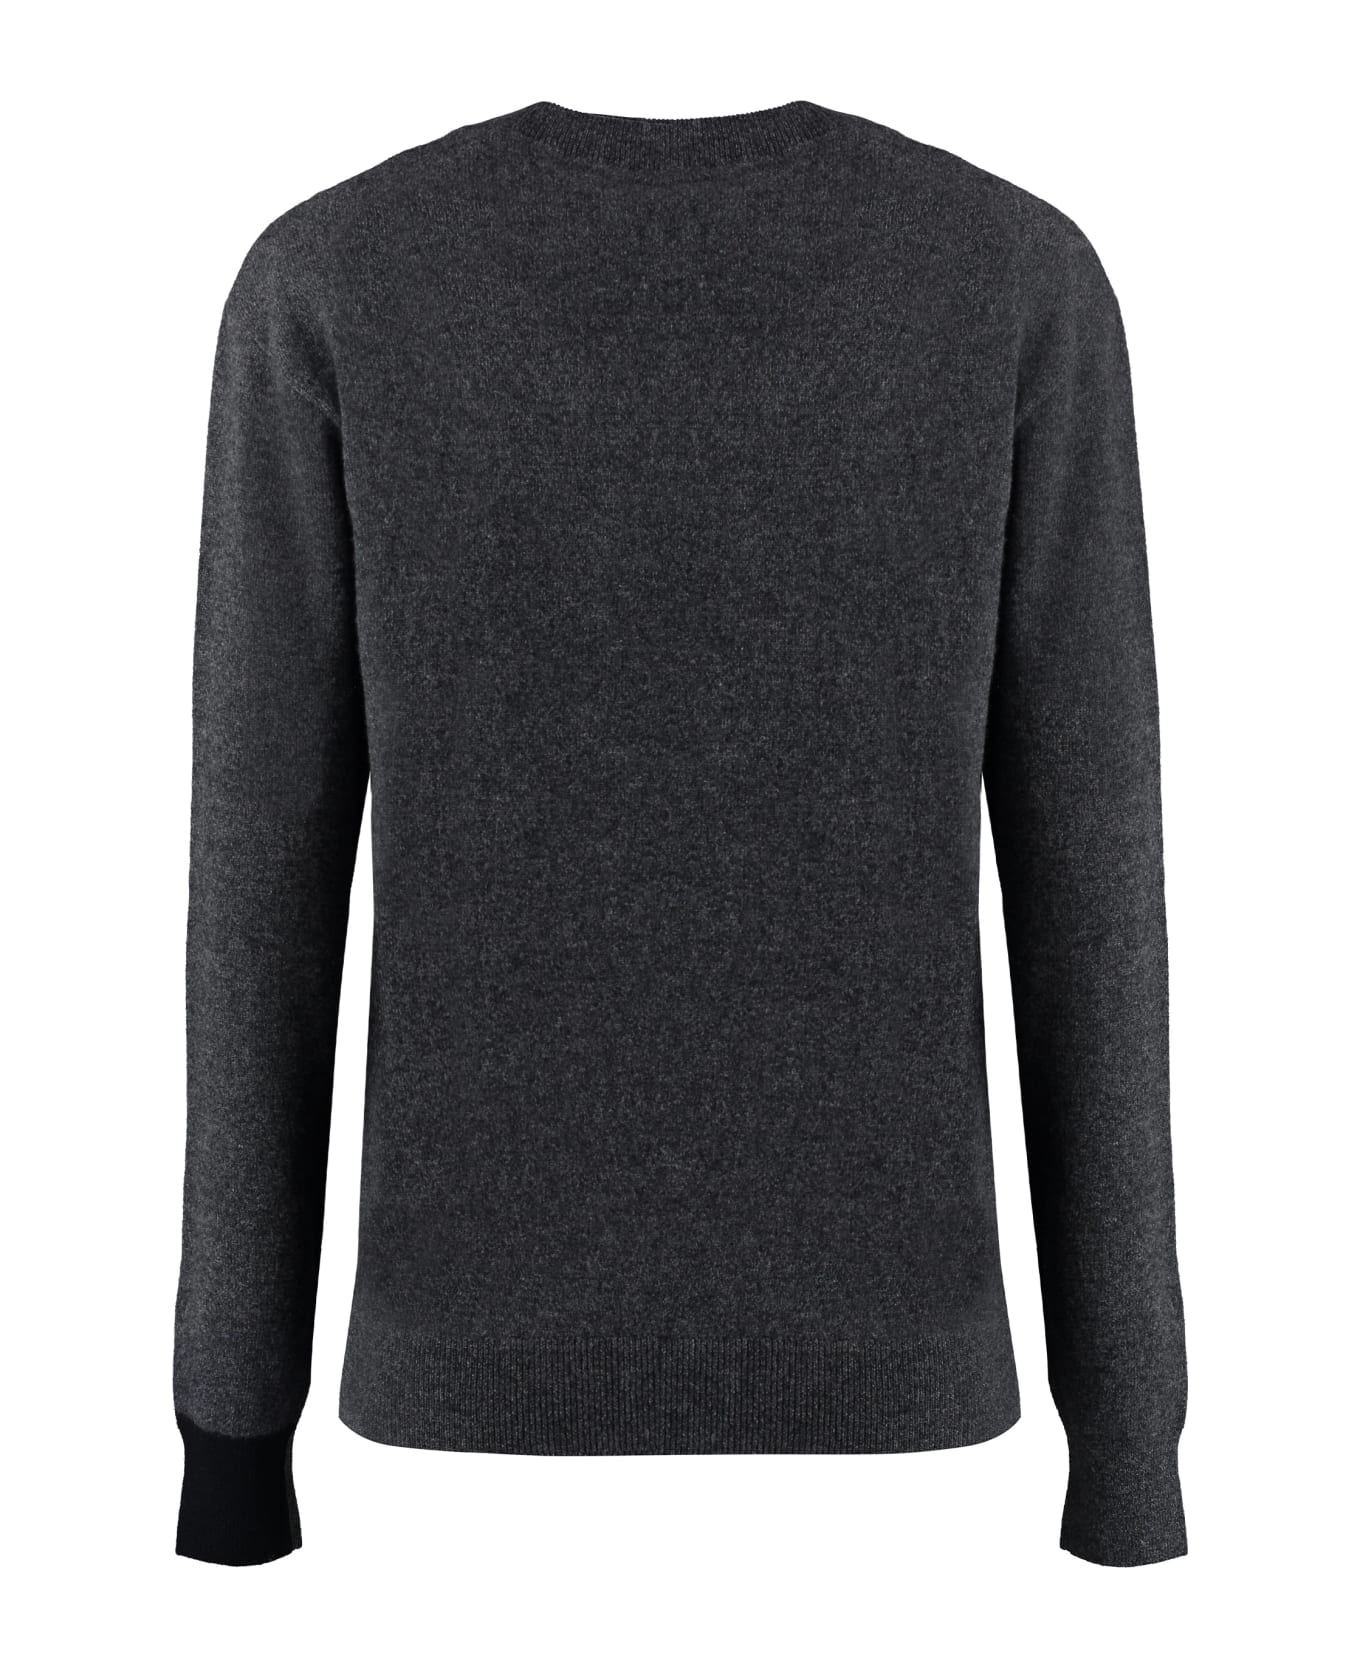 Patou Jp Wool And Cashmere Sweater - grey